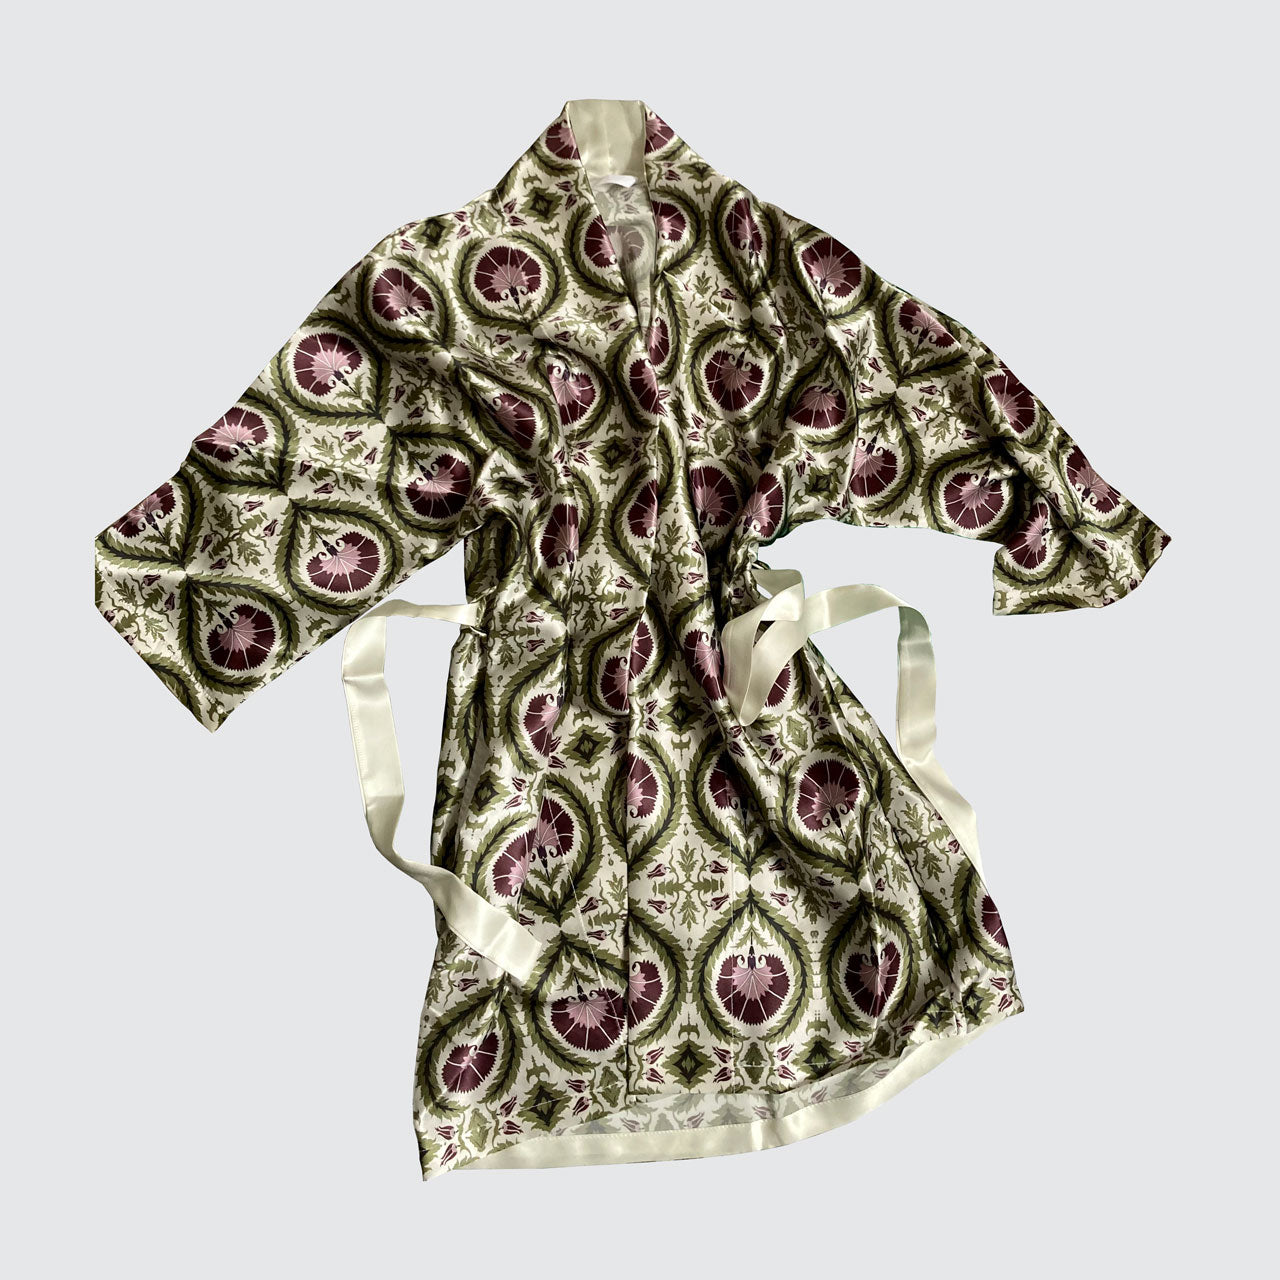 Real silk kimono with an acanthus and wreath design in green and purple on a white background